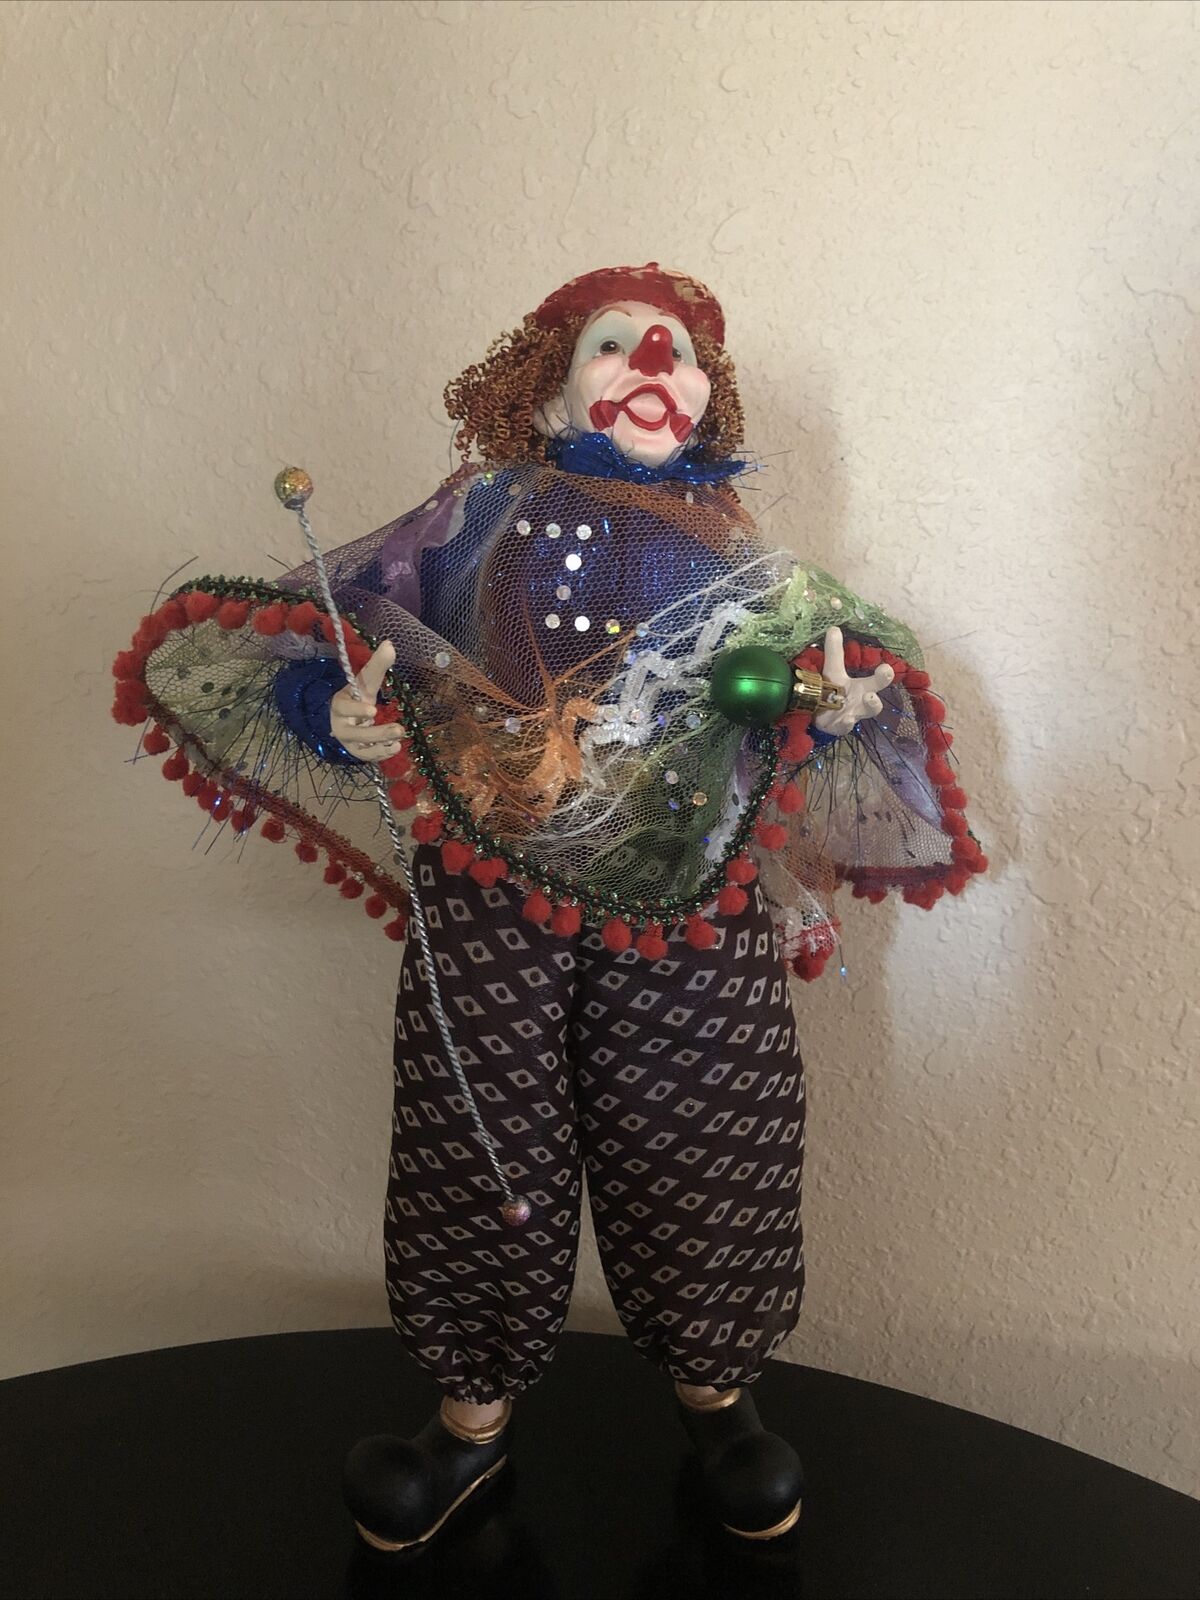 clown figurine collectible, 14”, Fabric Clothing, Detailed Face And Hands